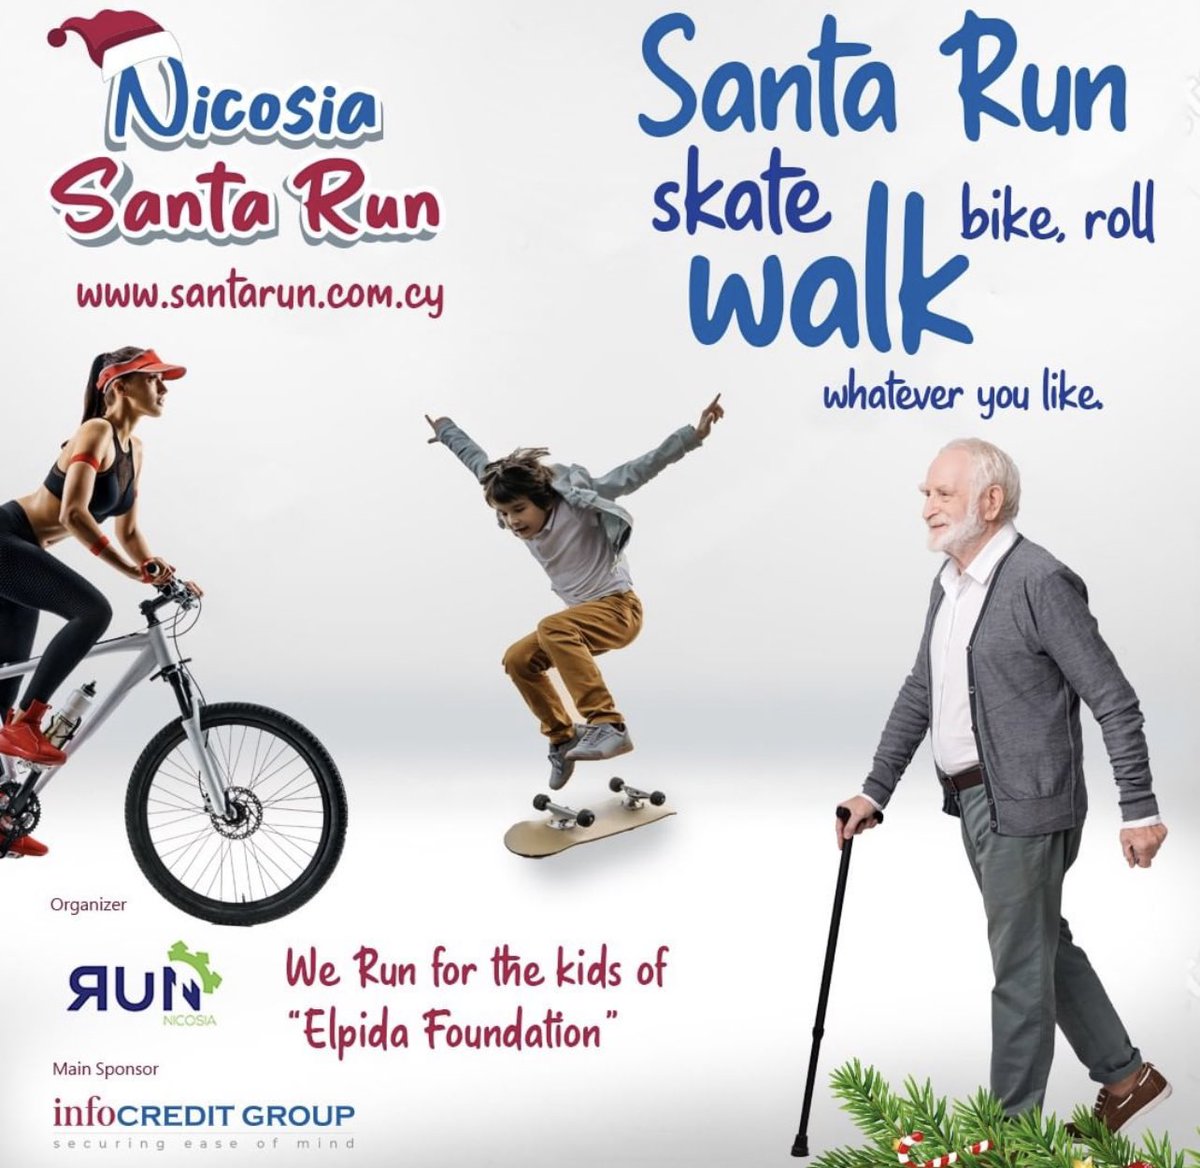 Santa Run, walk, skate, bike, roll whatever you like. Just join us to have fun and make the Kids of the Makarios Hospital Oncology Department smile.
Sign up for the Nicosia Santa Run 
Donations are made through the “Elpida Foundation”
santarun.com.cy #santarun